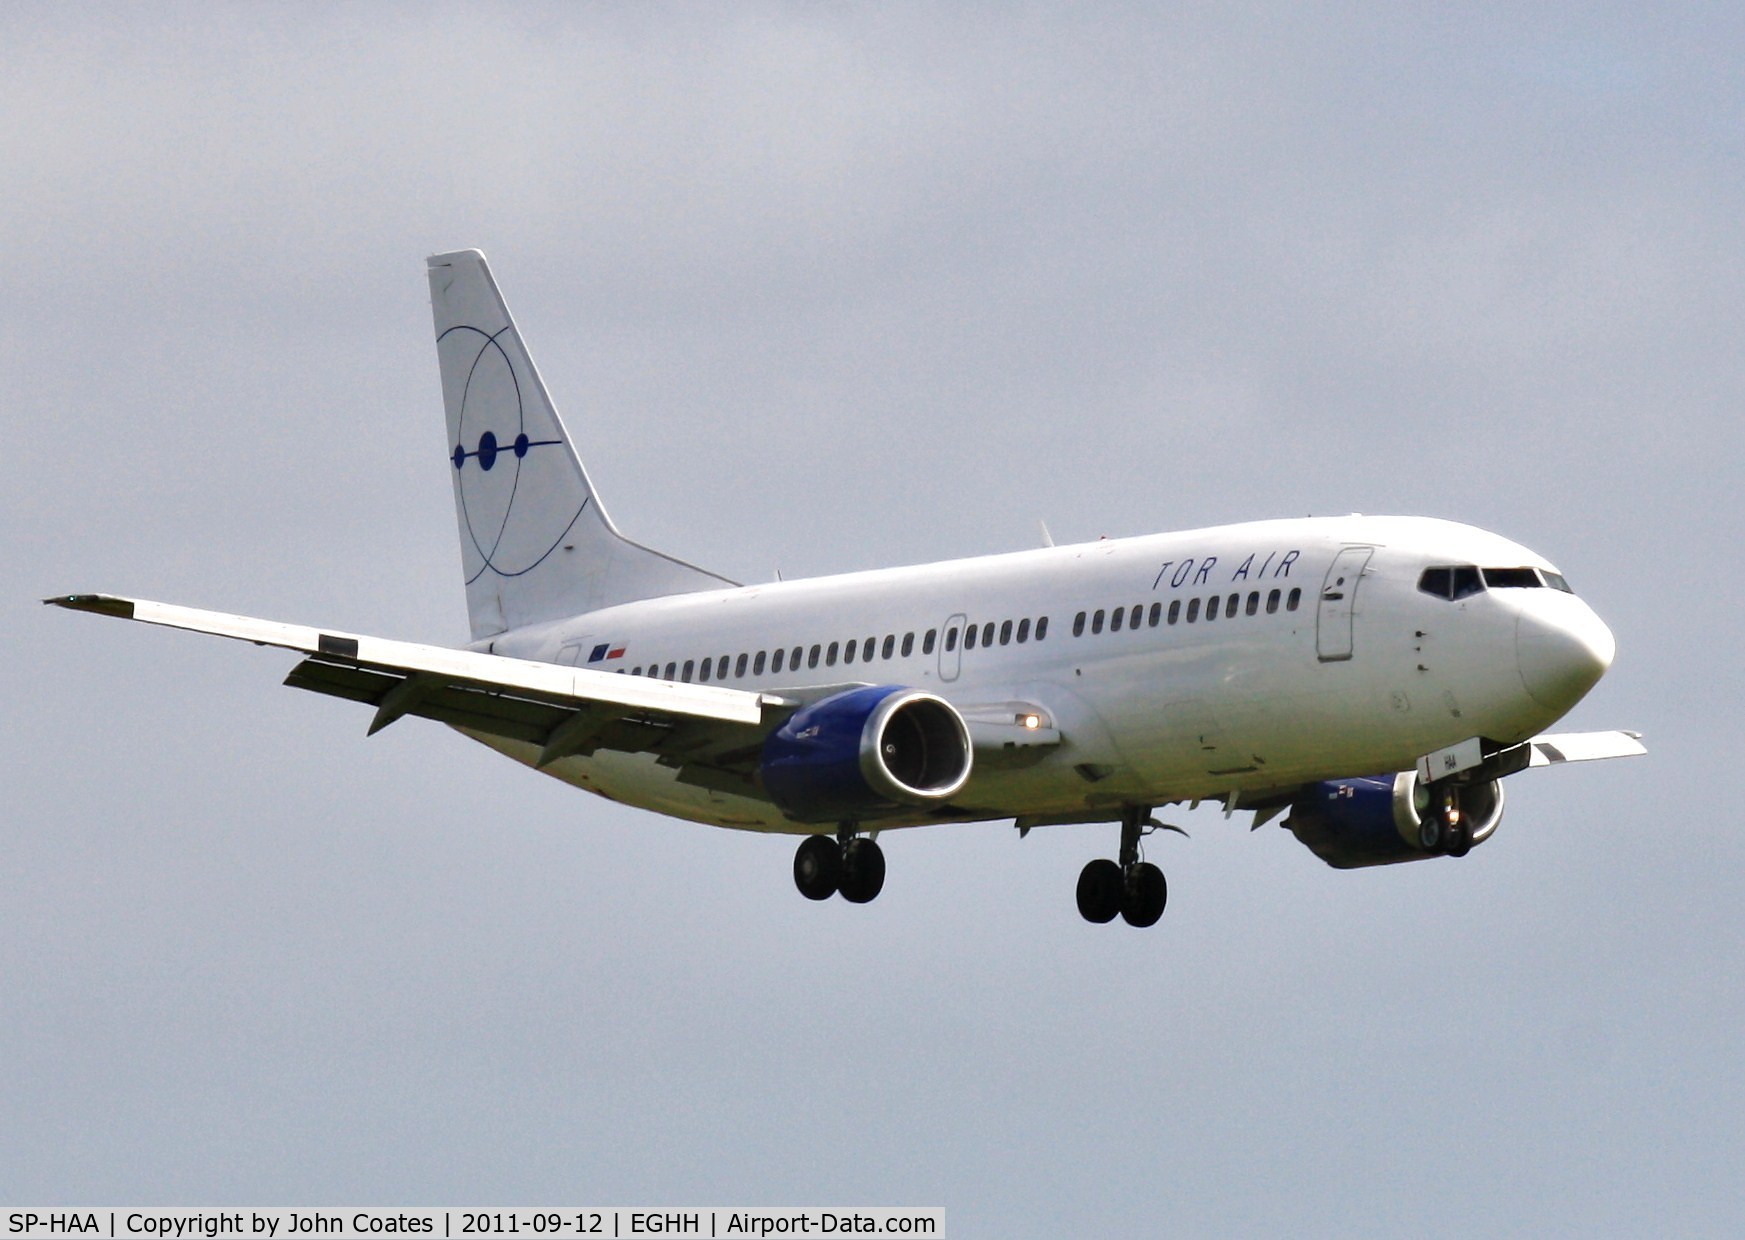 SP-HAA, 1990 Boeing 737-322 C/N 24664, On approach to 26